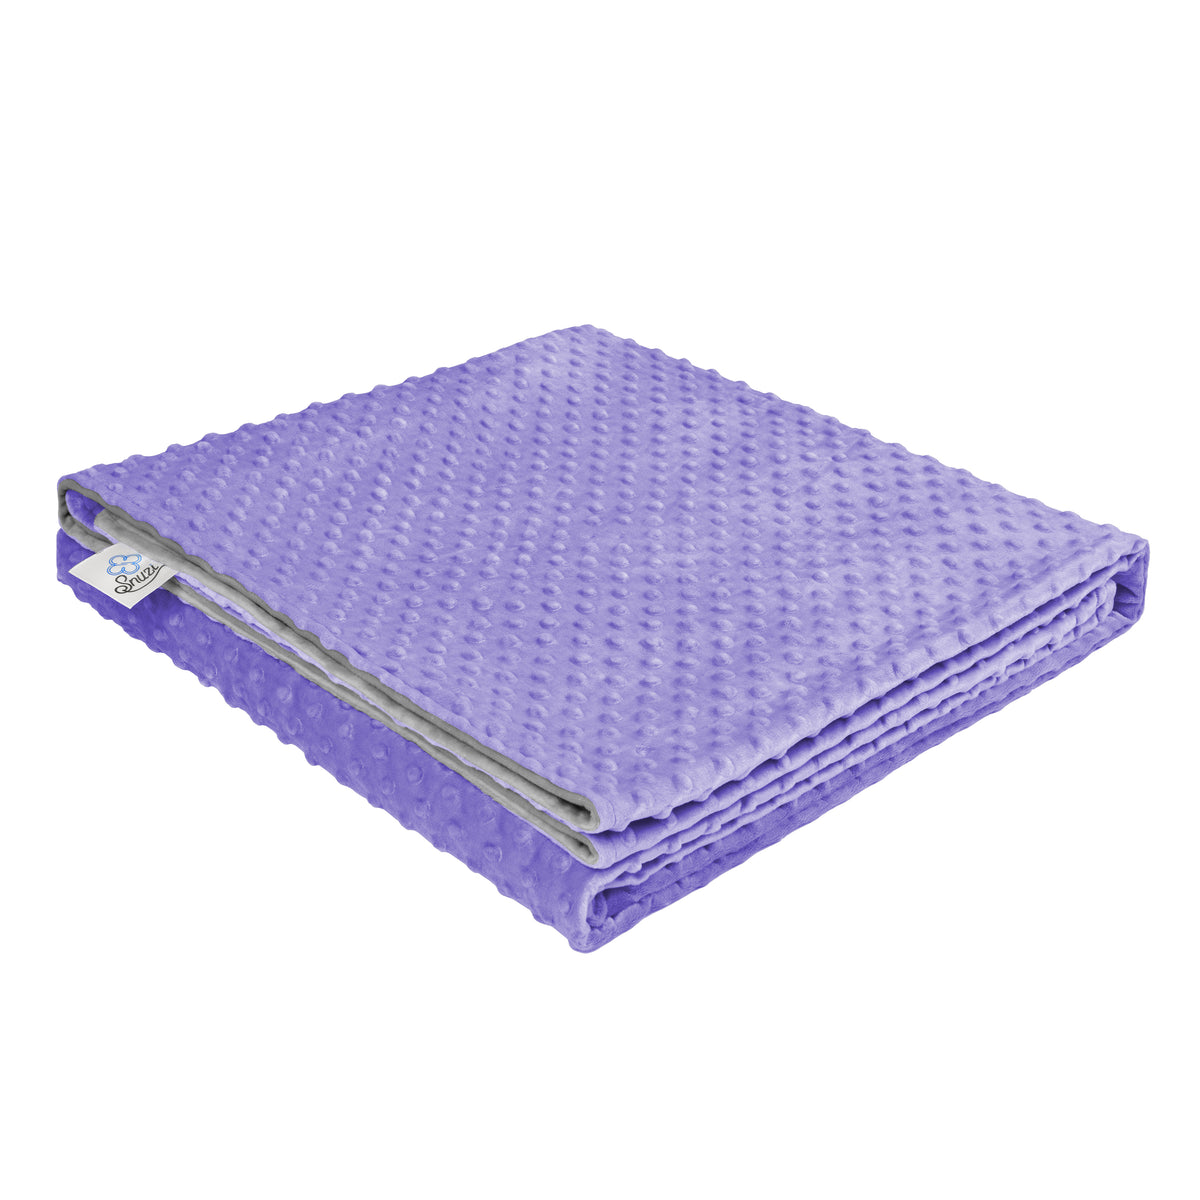 Covers for Weighted Blankets | FREE UK DELIVERY | Use GO15 for £15 off